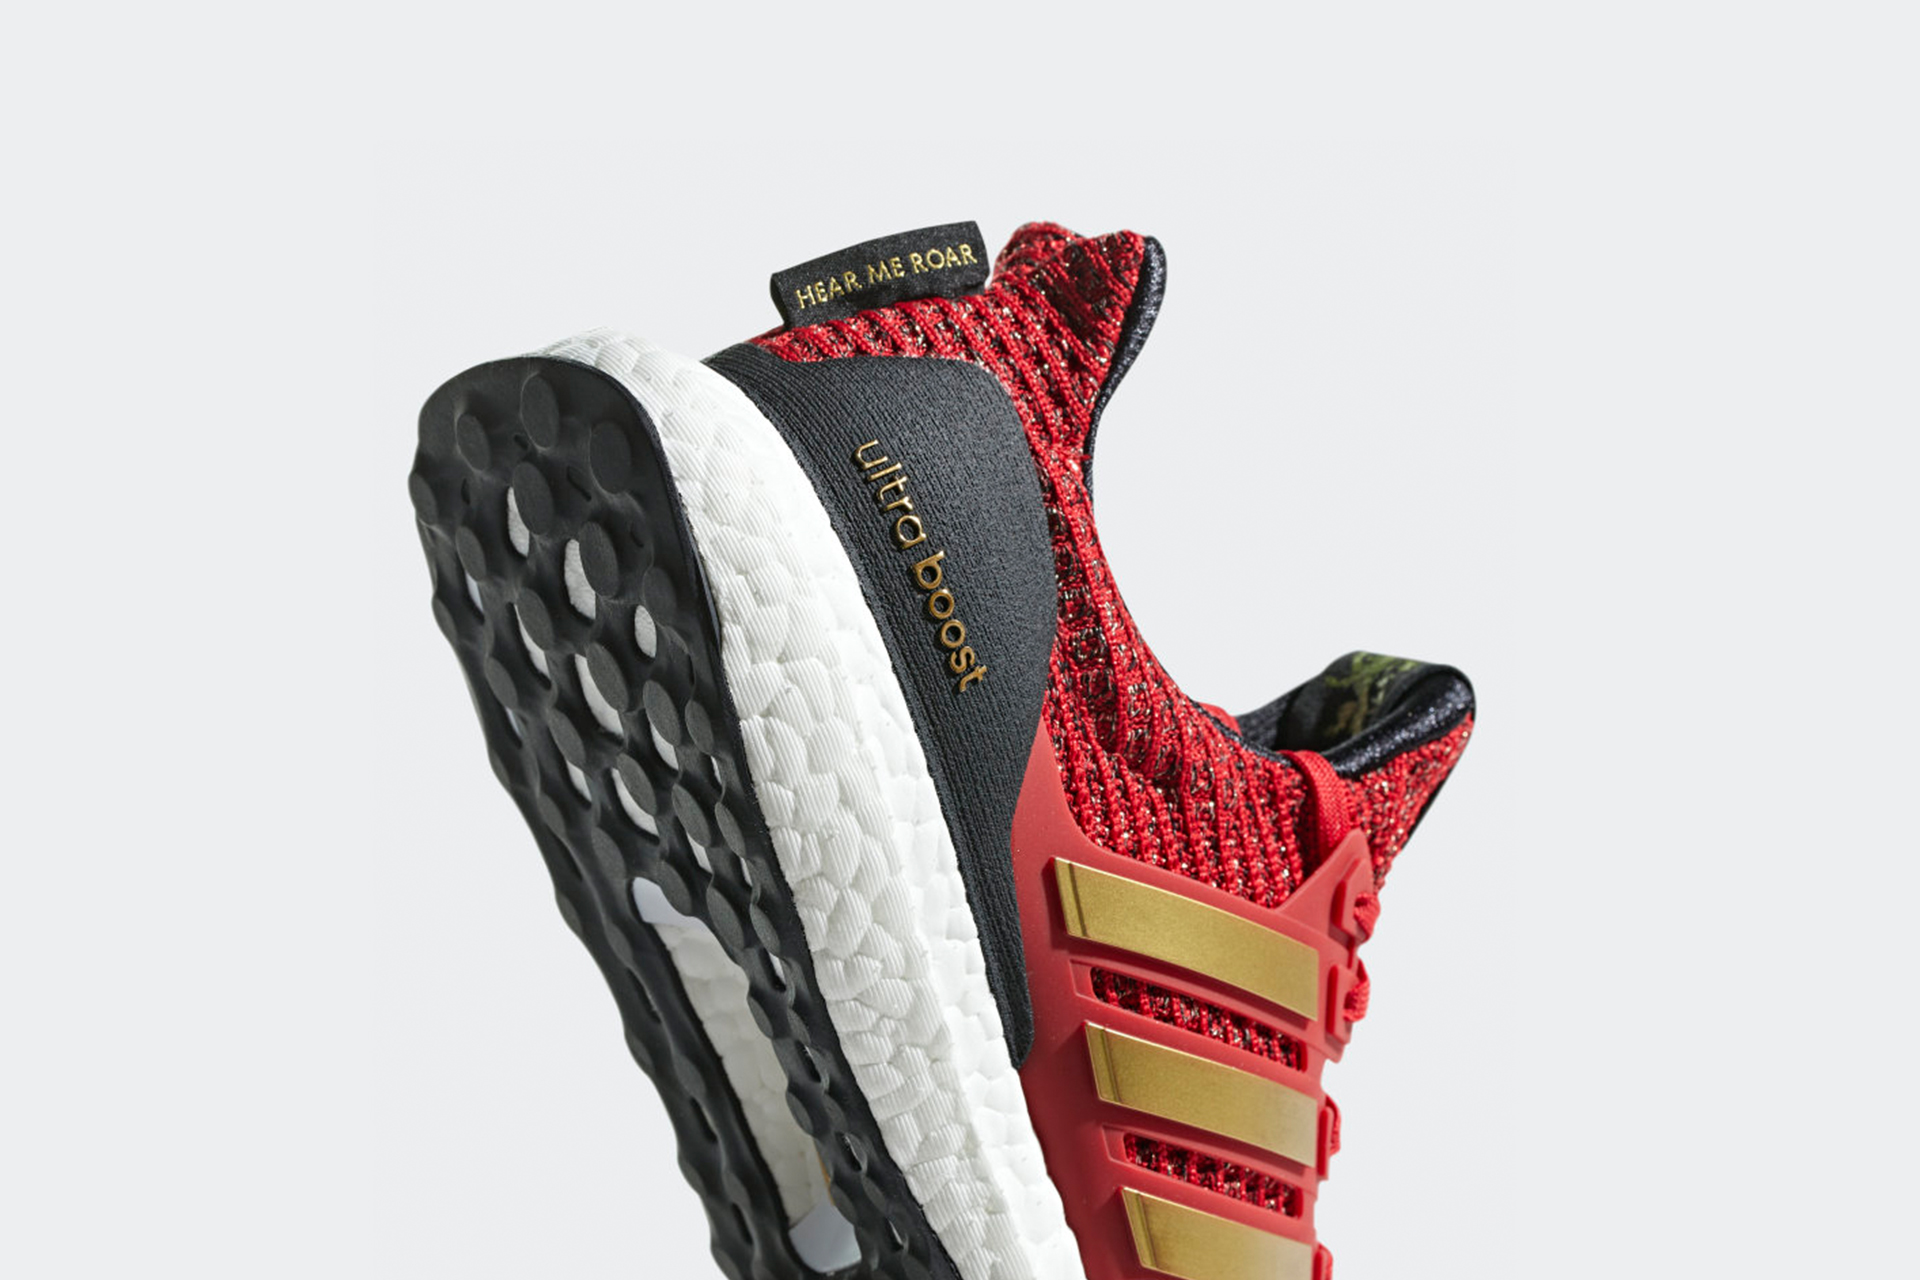 ADIDAS RUNNING X GAME OF THRONES ULTRABOOST W LANNISTER